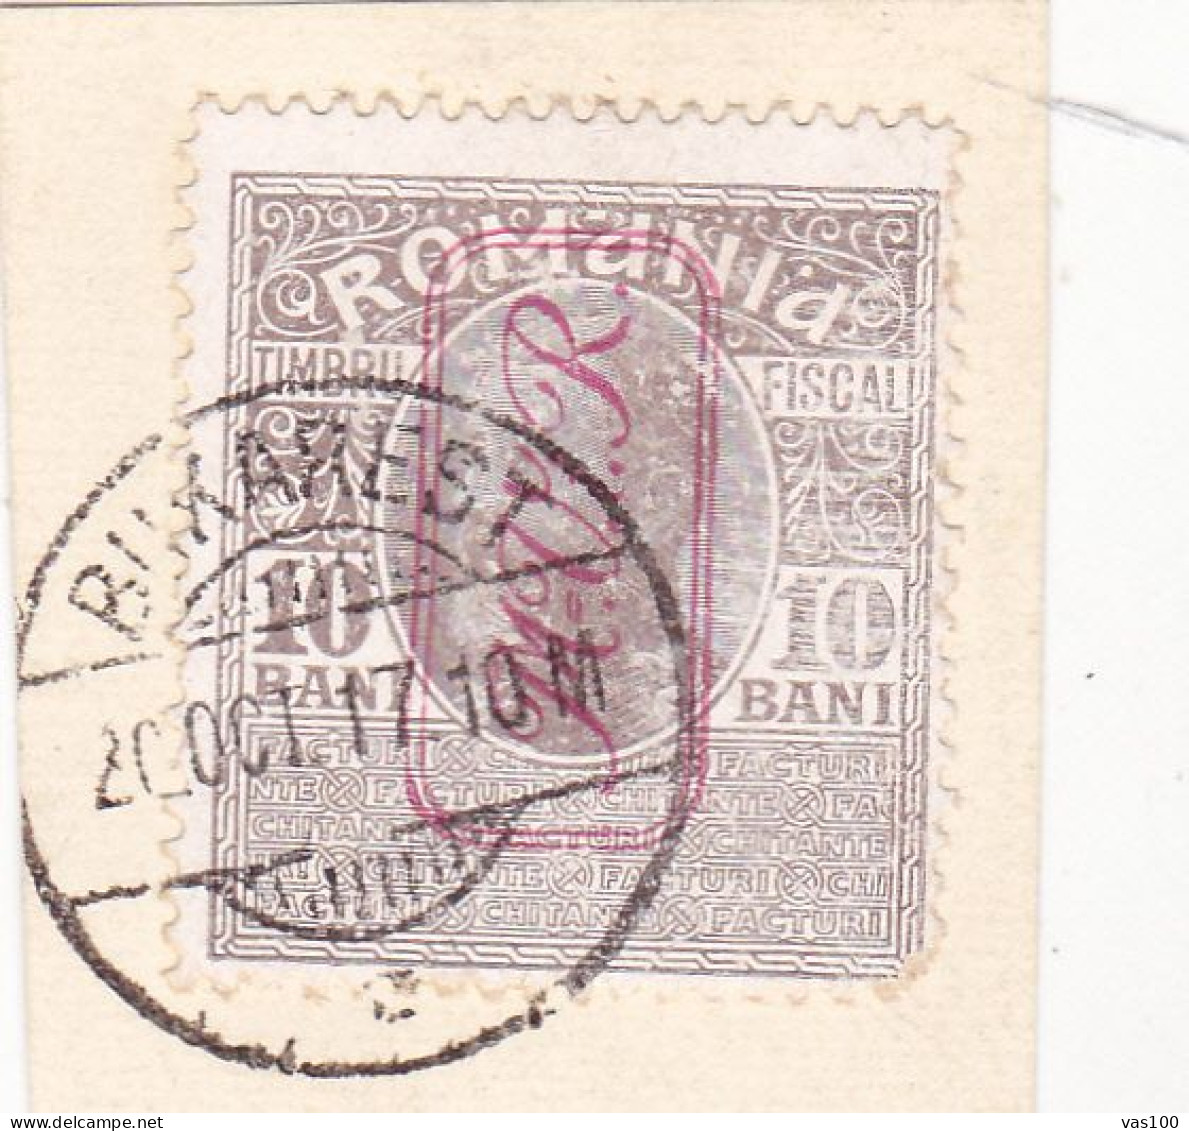 Germany WW1 Occupation In Romania 1917 MViR 10 BANI FISCAL POSTAGE USED FRAGMENT RARE! - Besetzungen